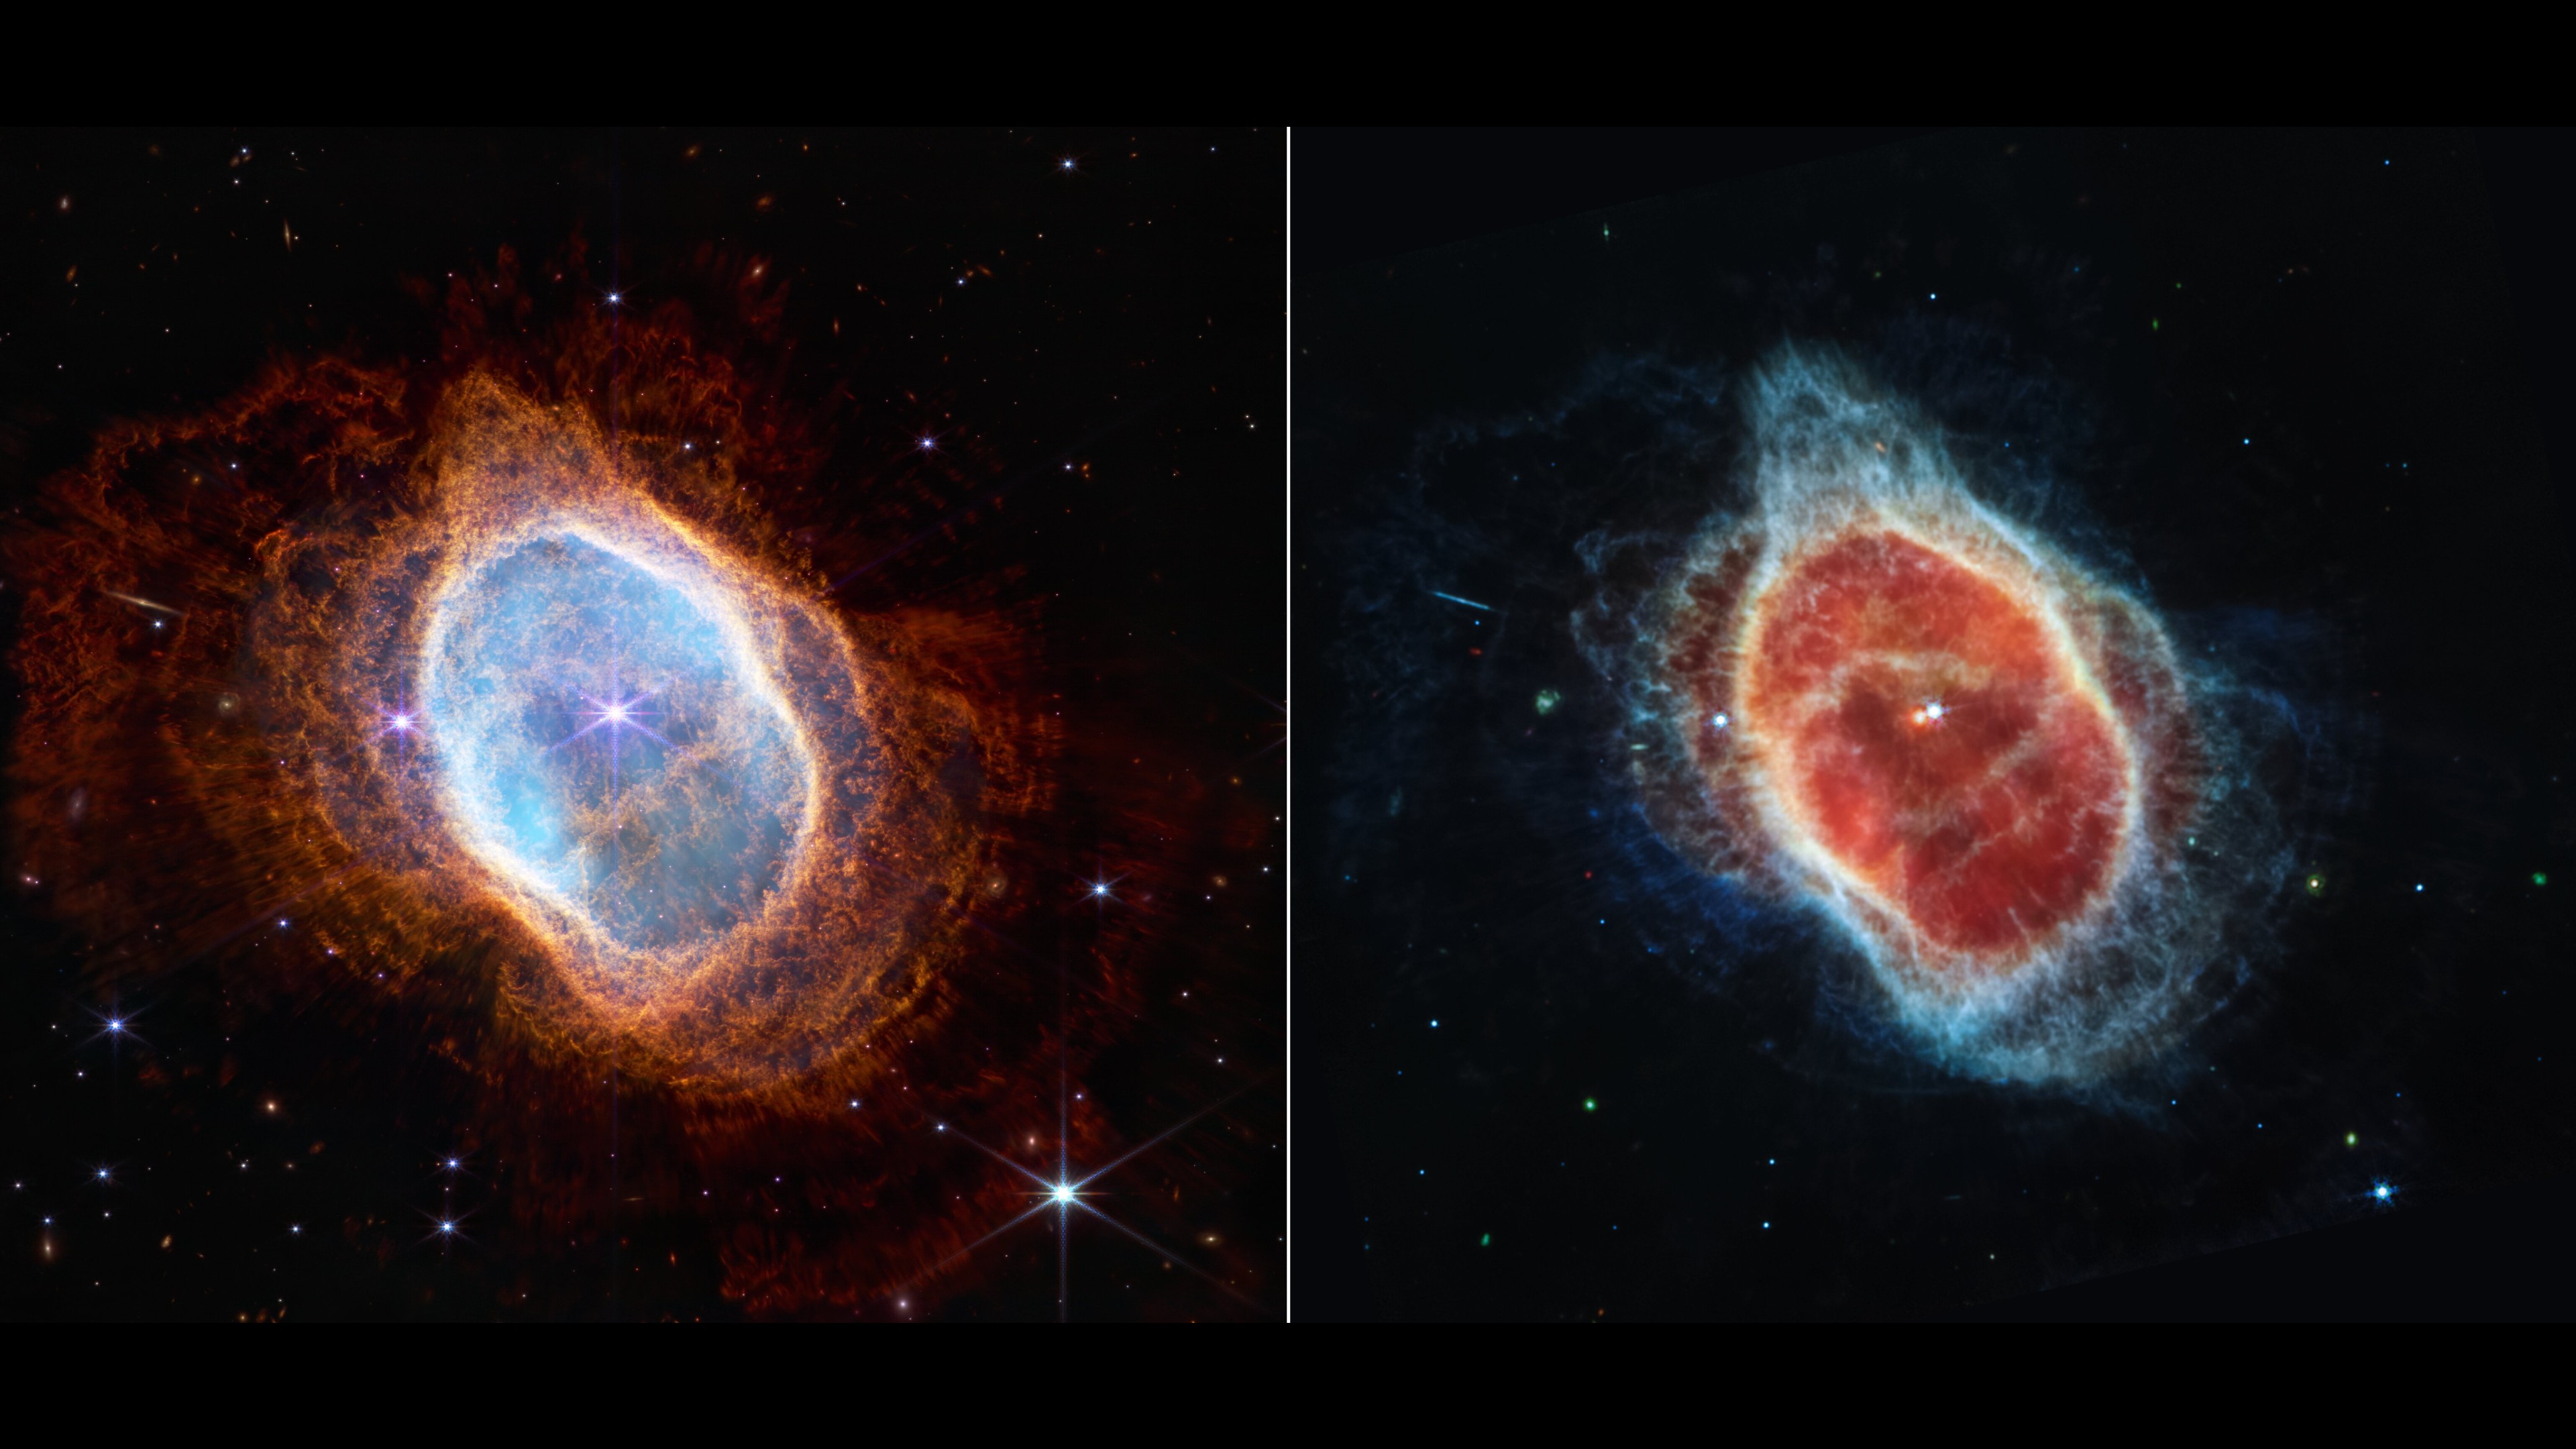 Daily News | Online News The image is split down the middle, showing two views of the Southern Ring Nebula.